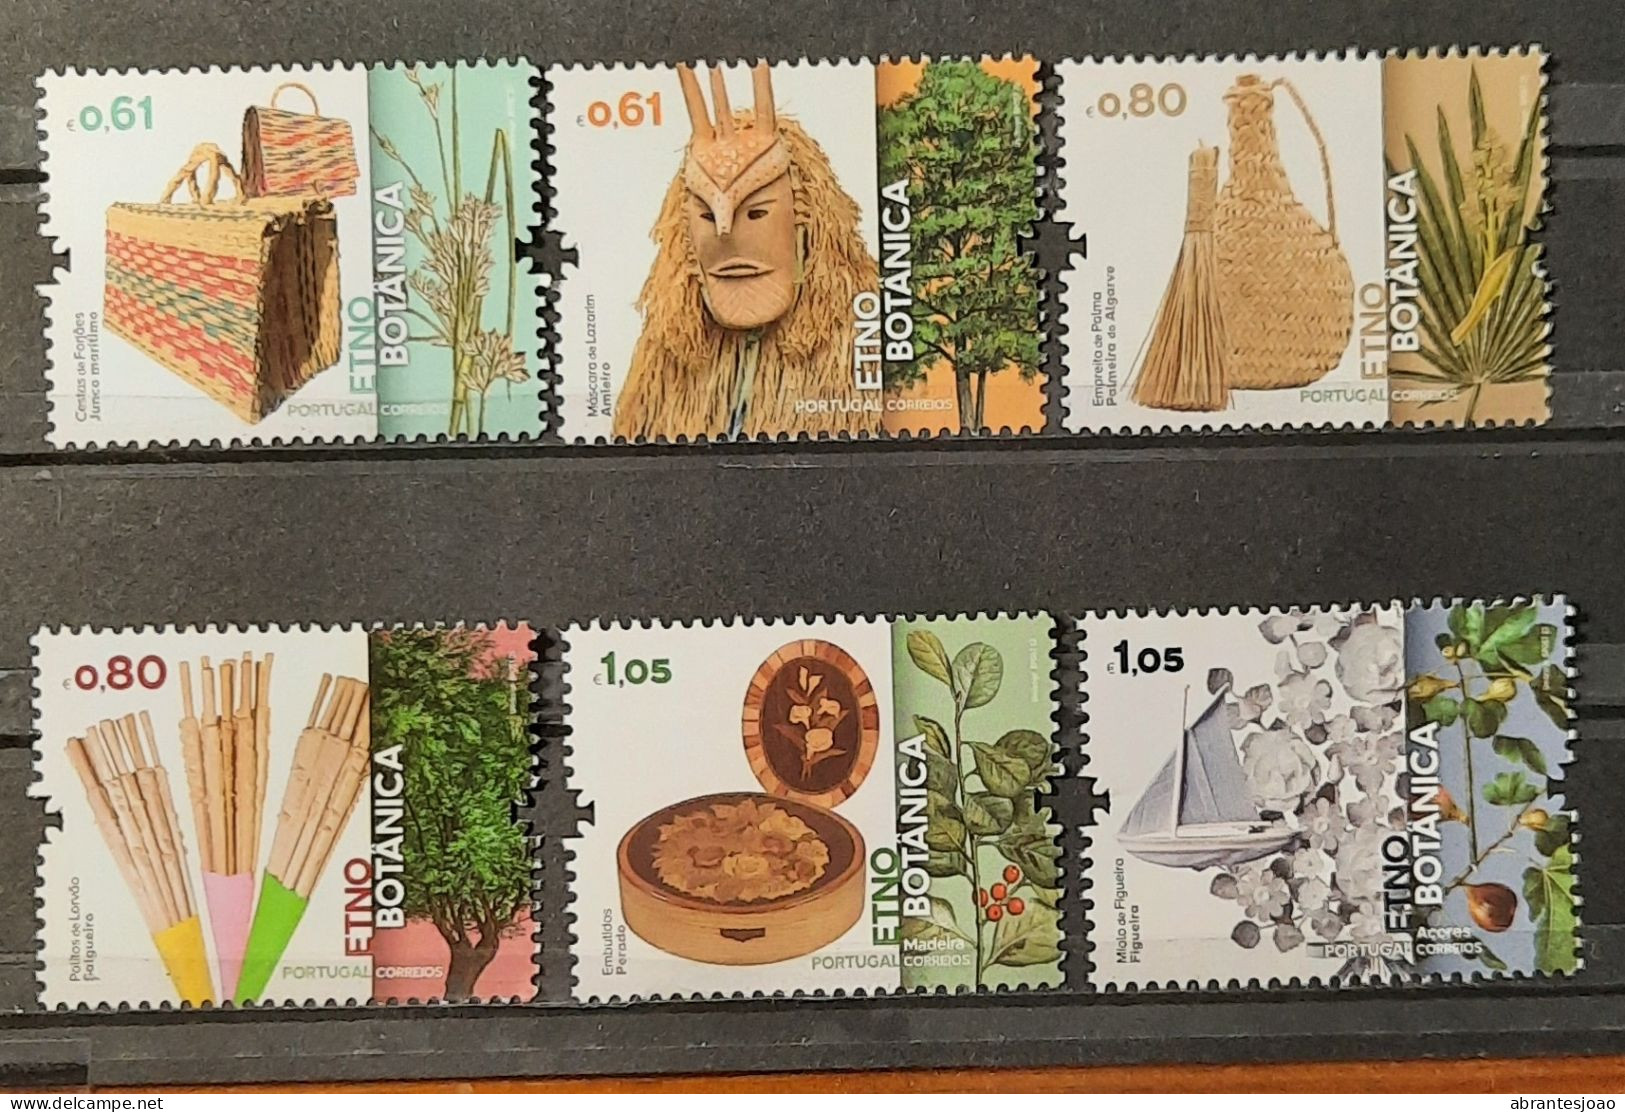 2023 - Portugal - MNH - Ethnobotany  - Interaction Between Humans And Plants - 6 Stamps + Block Of 2 Stamps - Unused Stamps